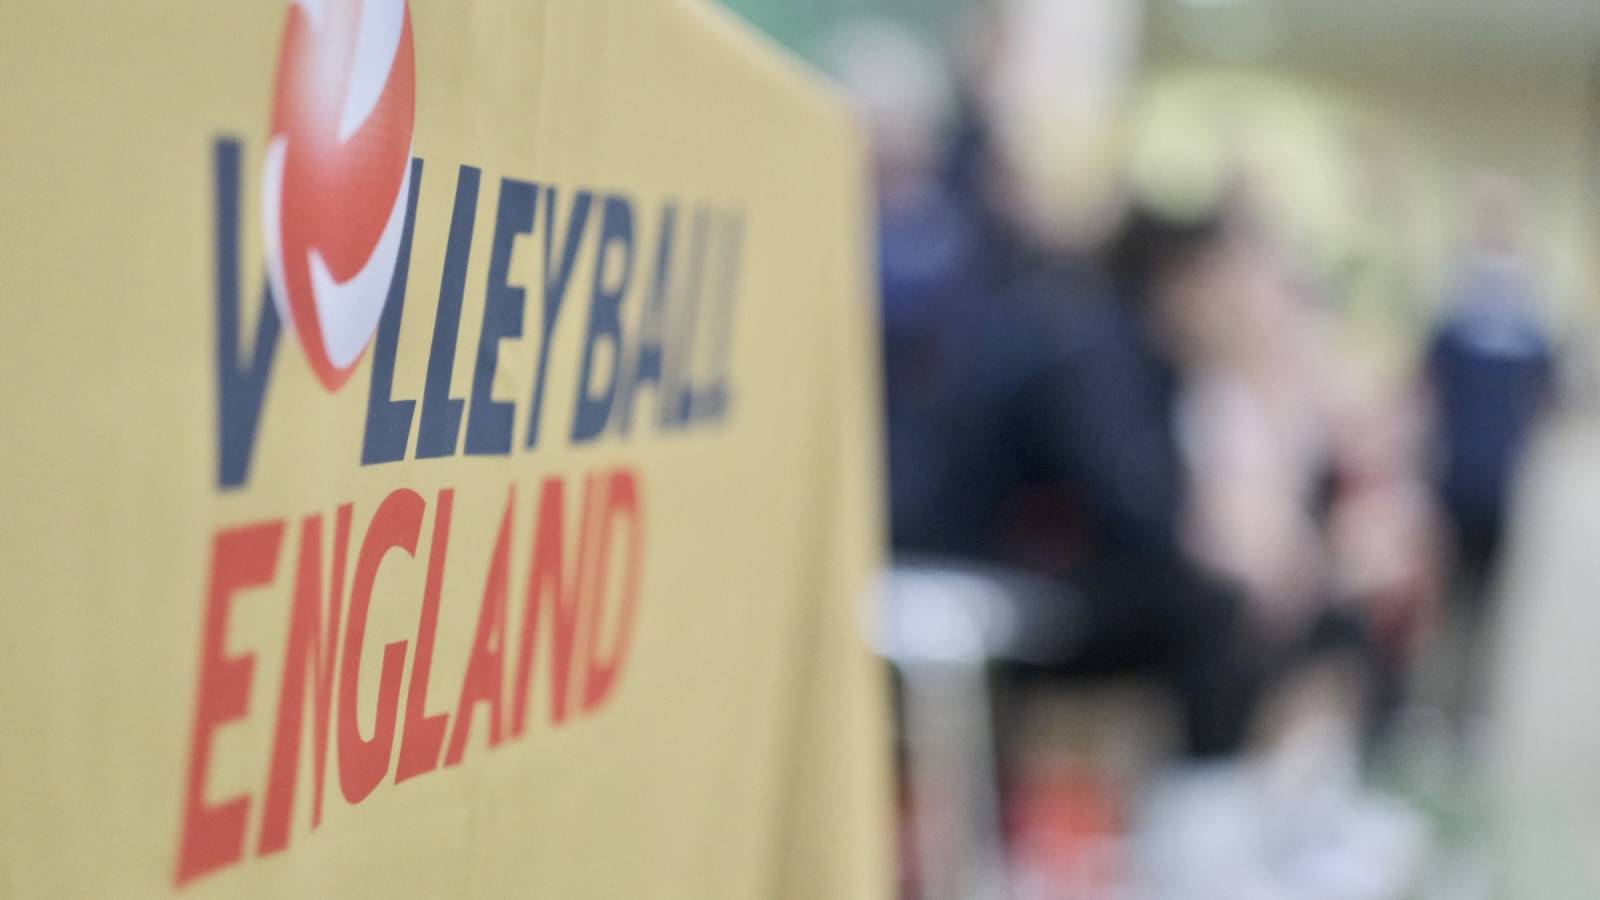 Agenda for Volleyball England's 2022 AGM